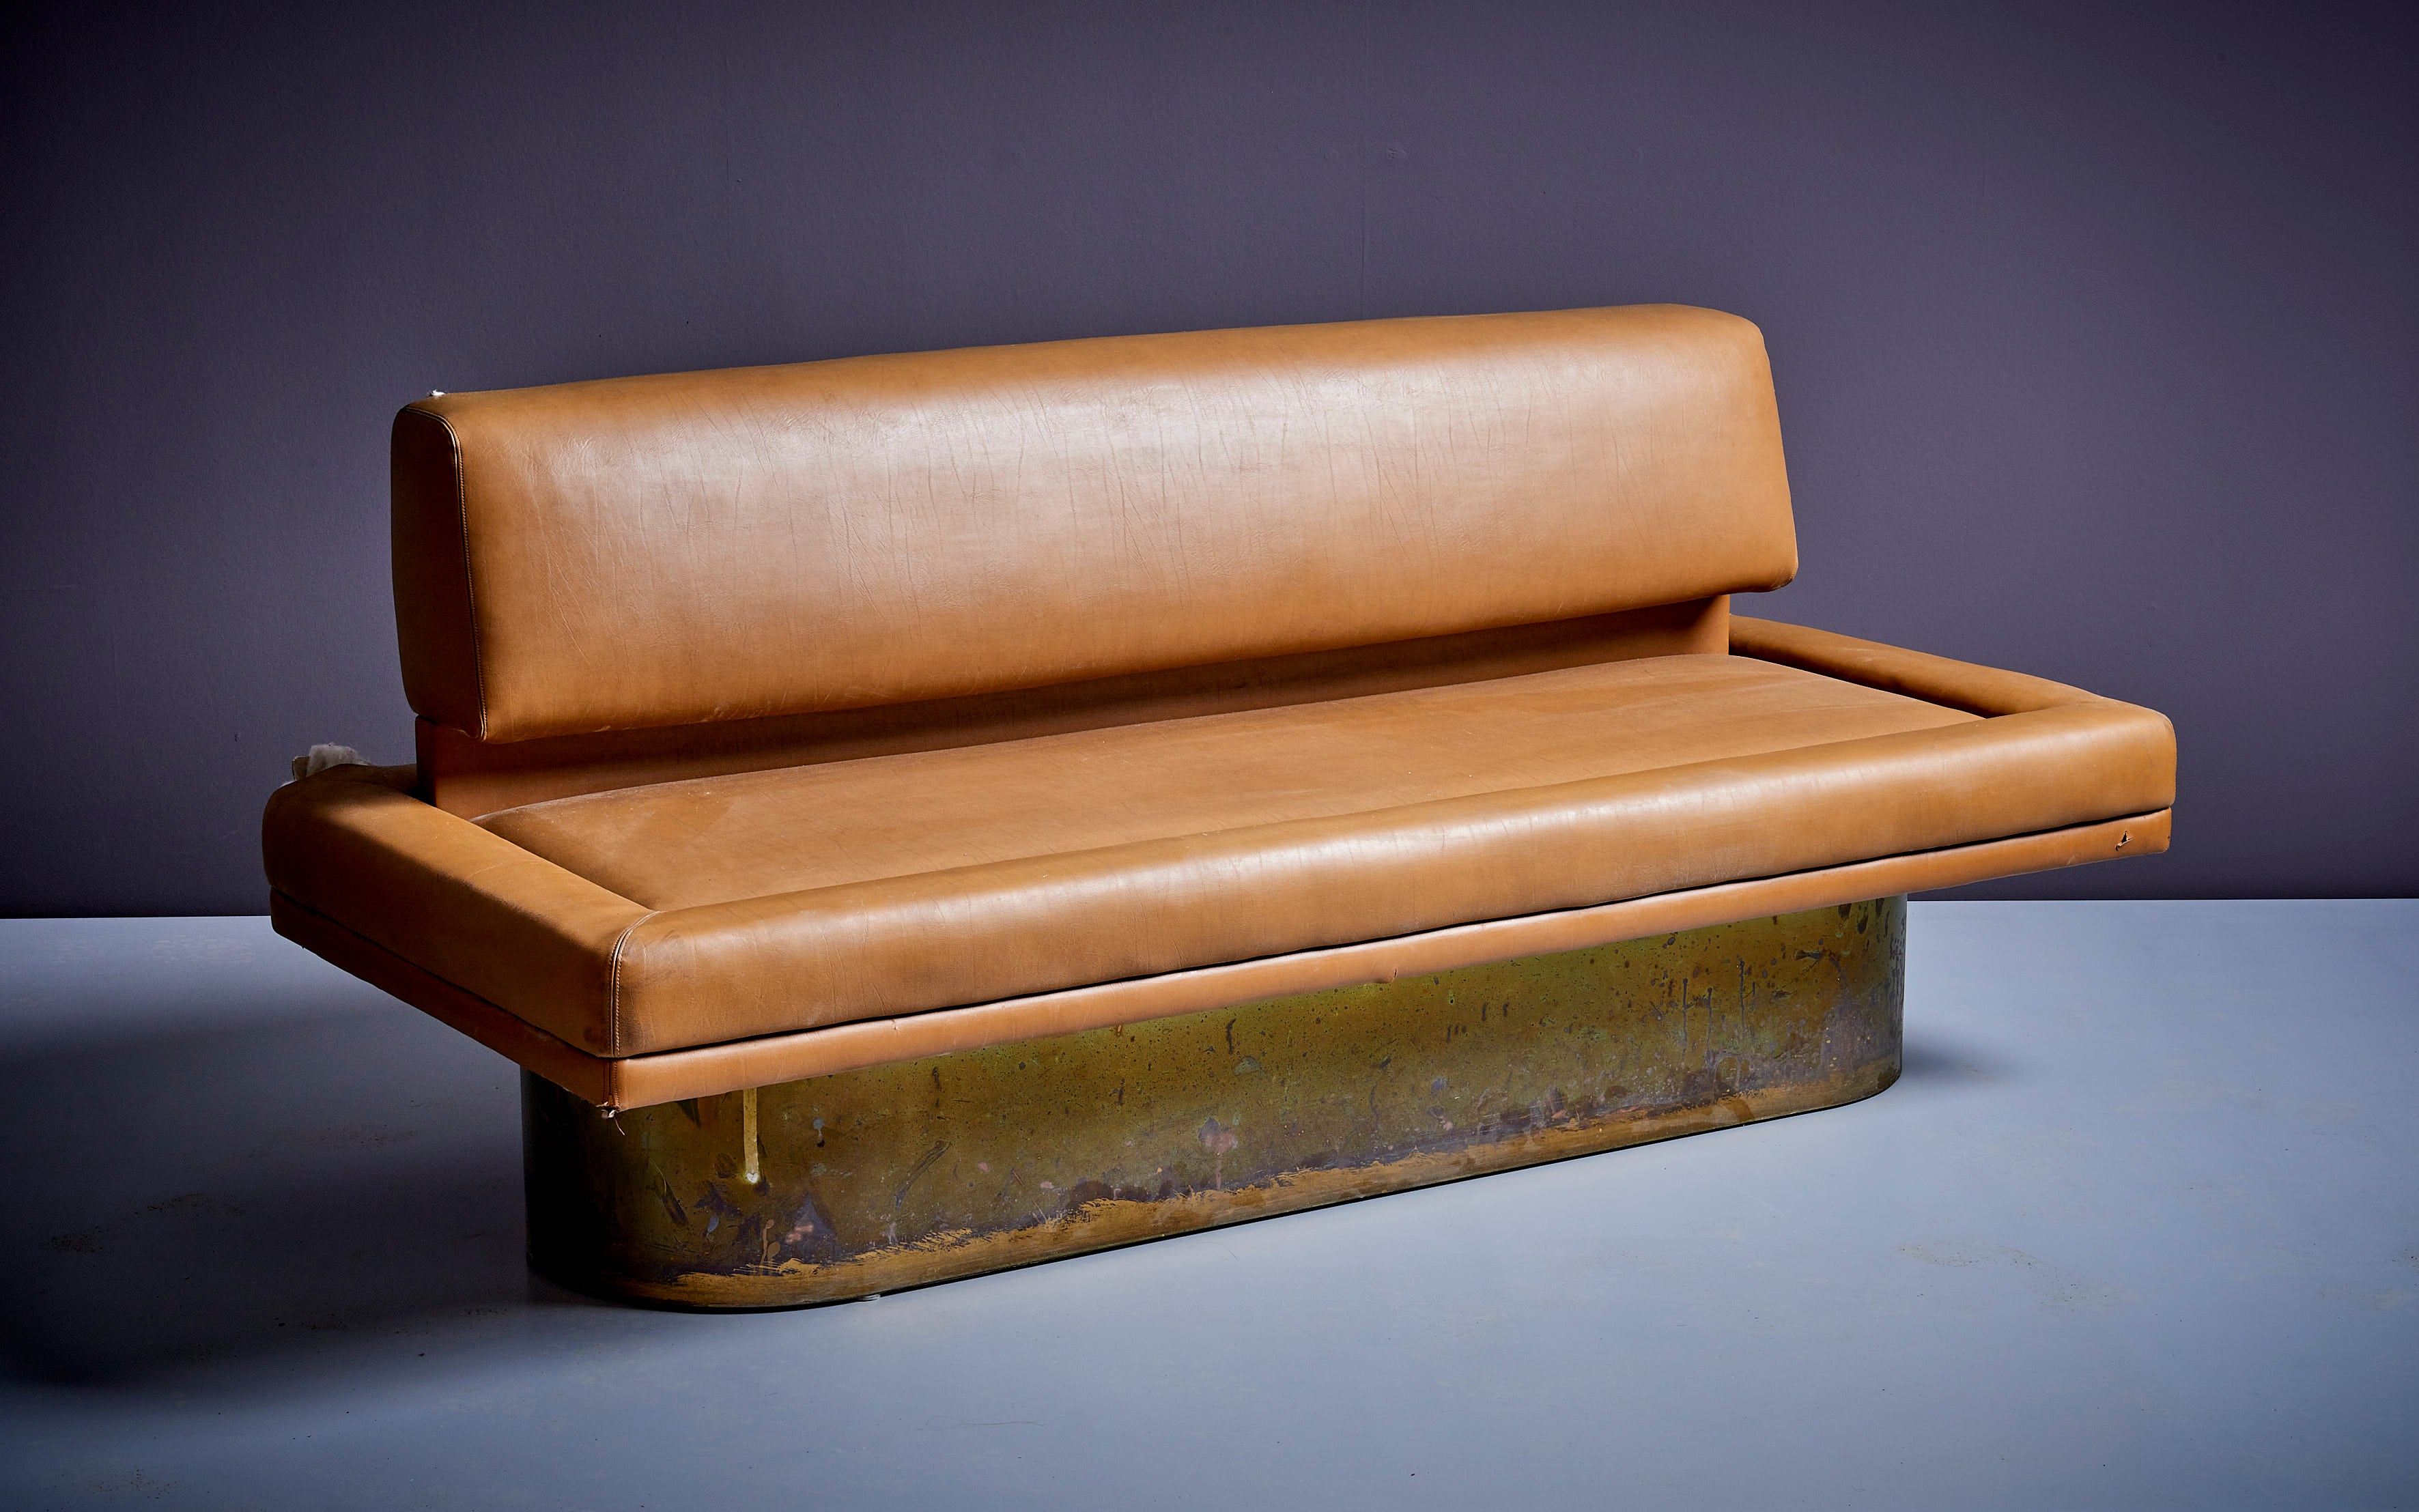 Leena Kolinen Sofa in Brown Faux Leather, Finland - 1960s. Can be reupholstered in our in-house workshop. Please ask for a quote. 